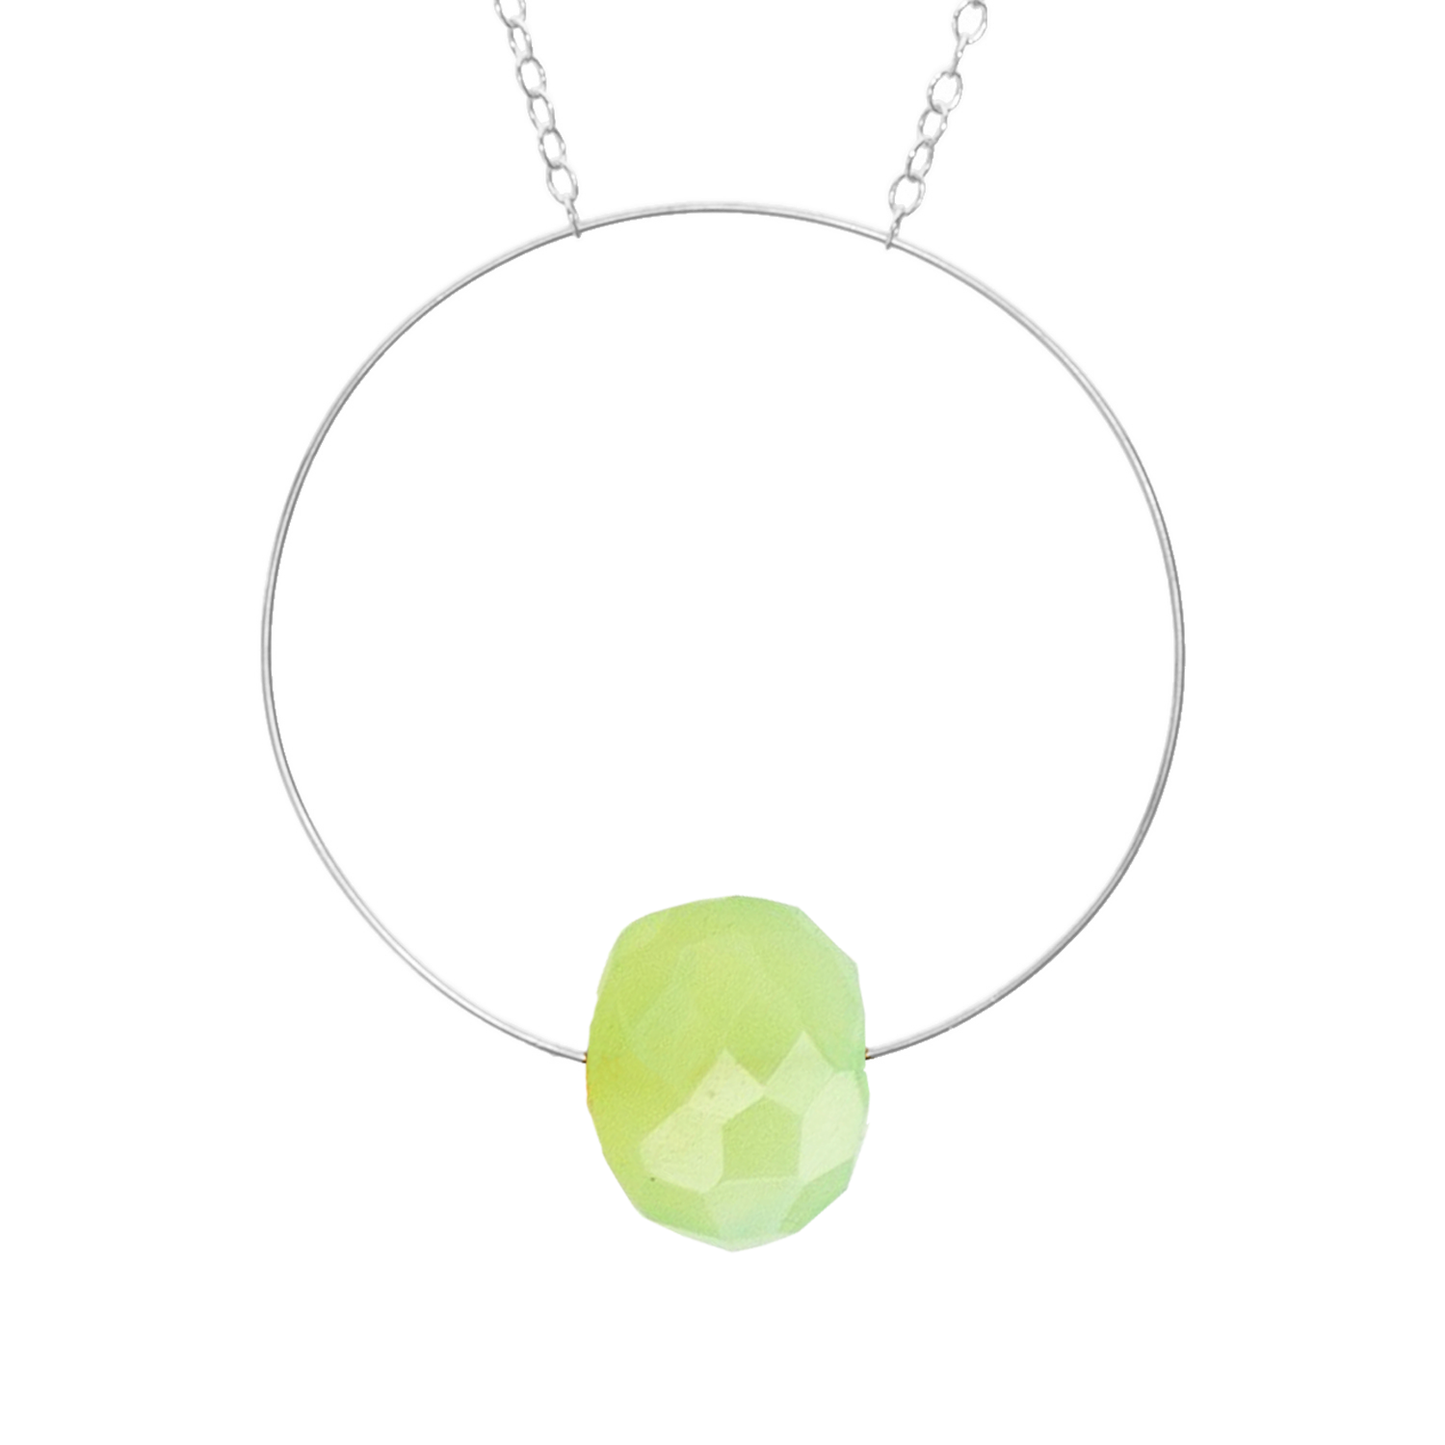 Circle Pendant Necklace with hand-cut Gemstones